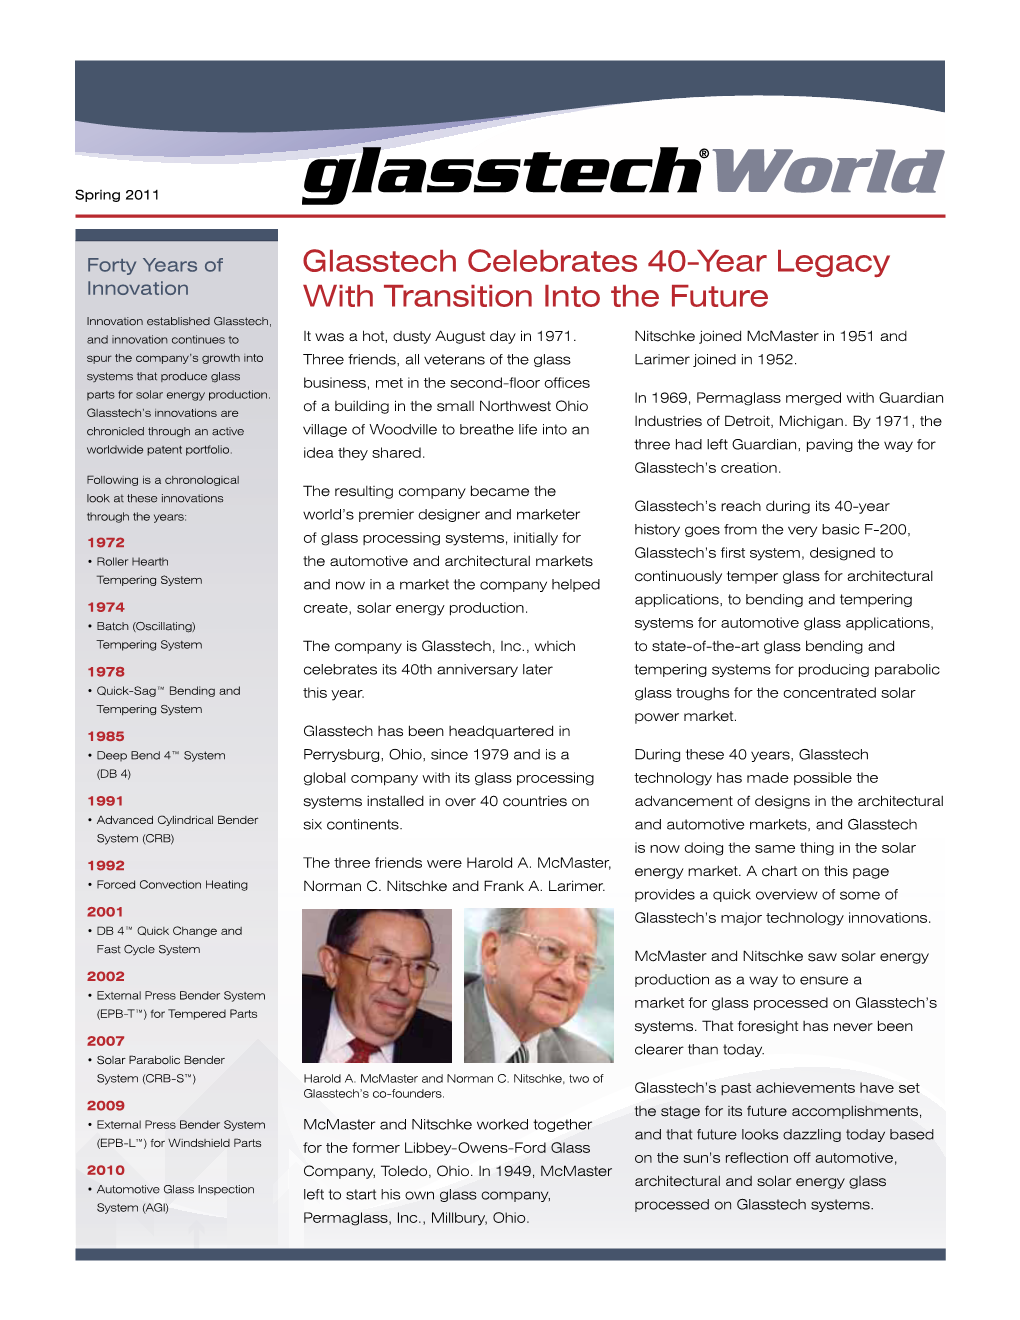 Spring 2011 Face of Glasstech in China and India